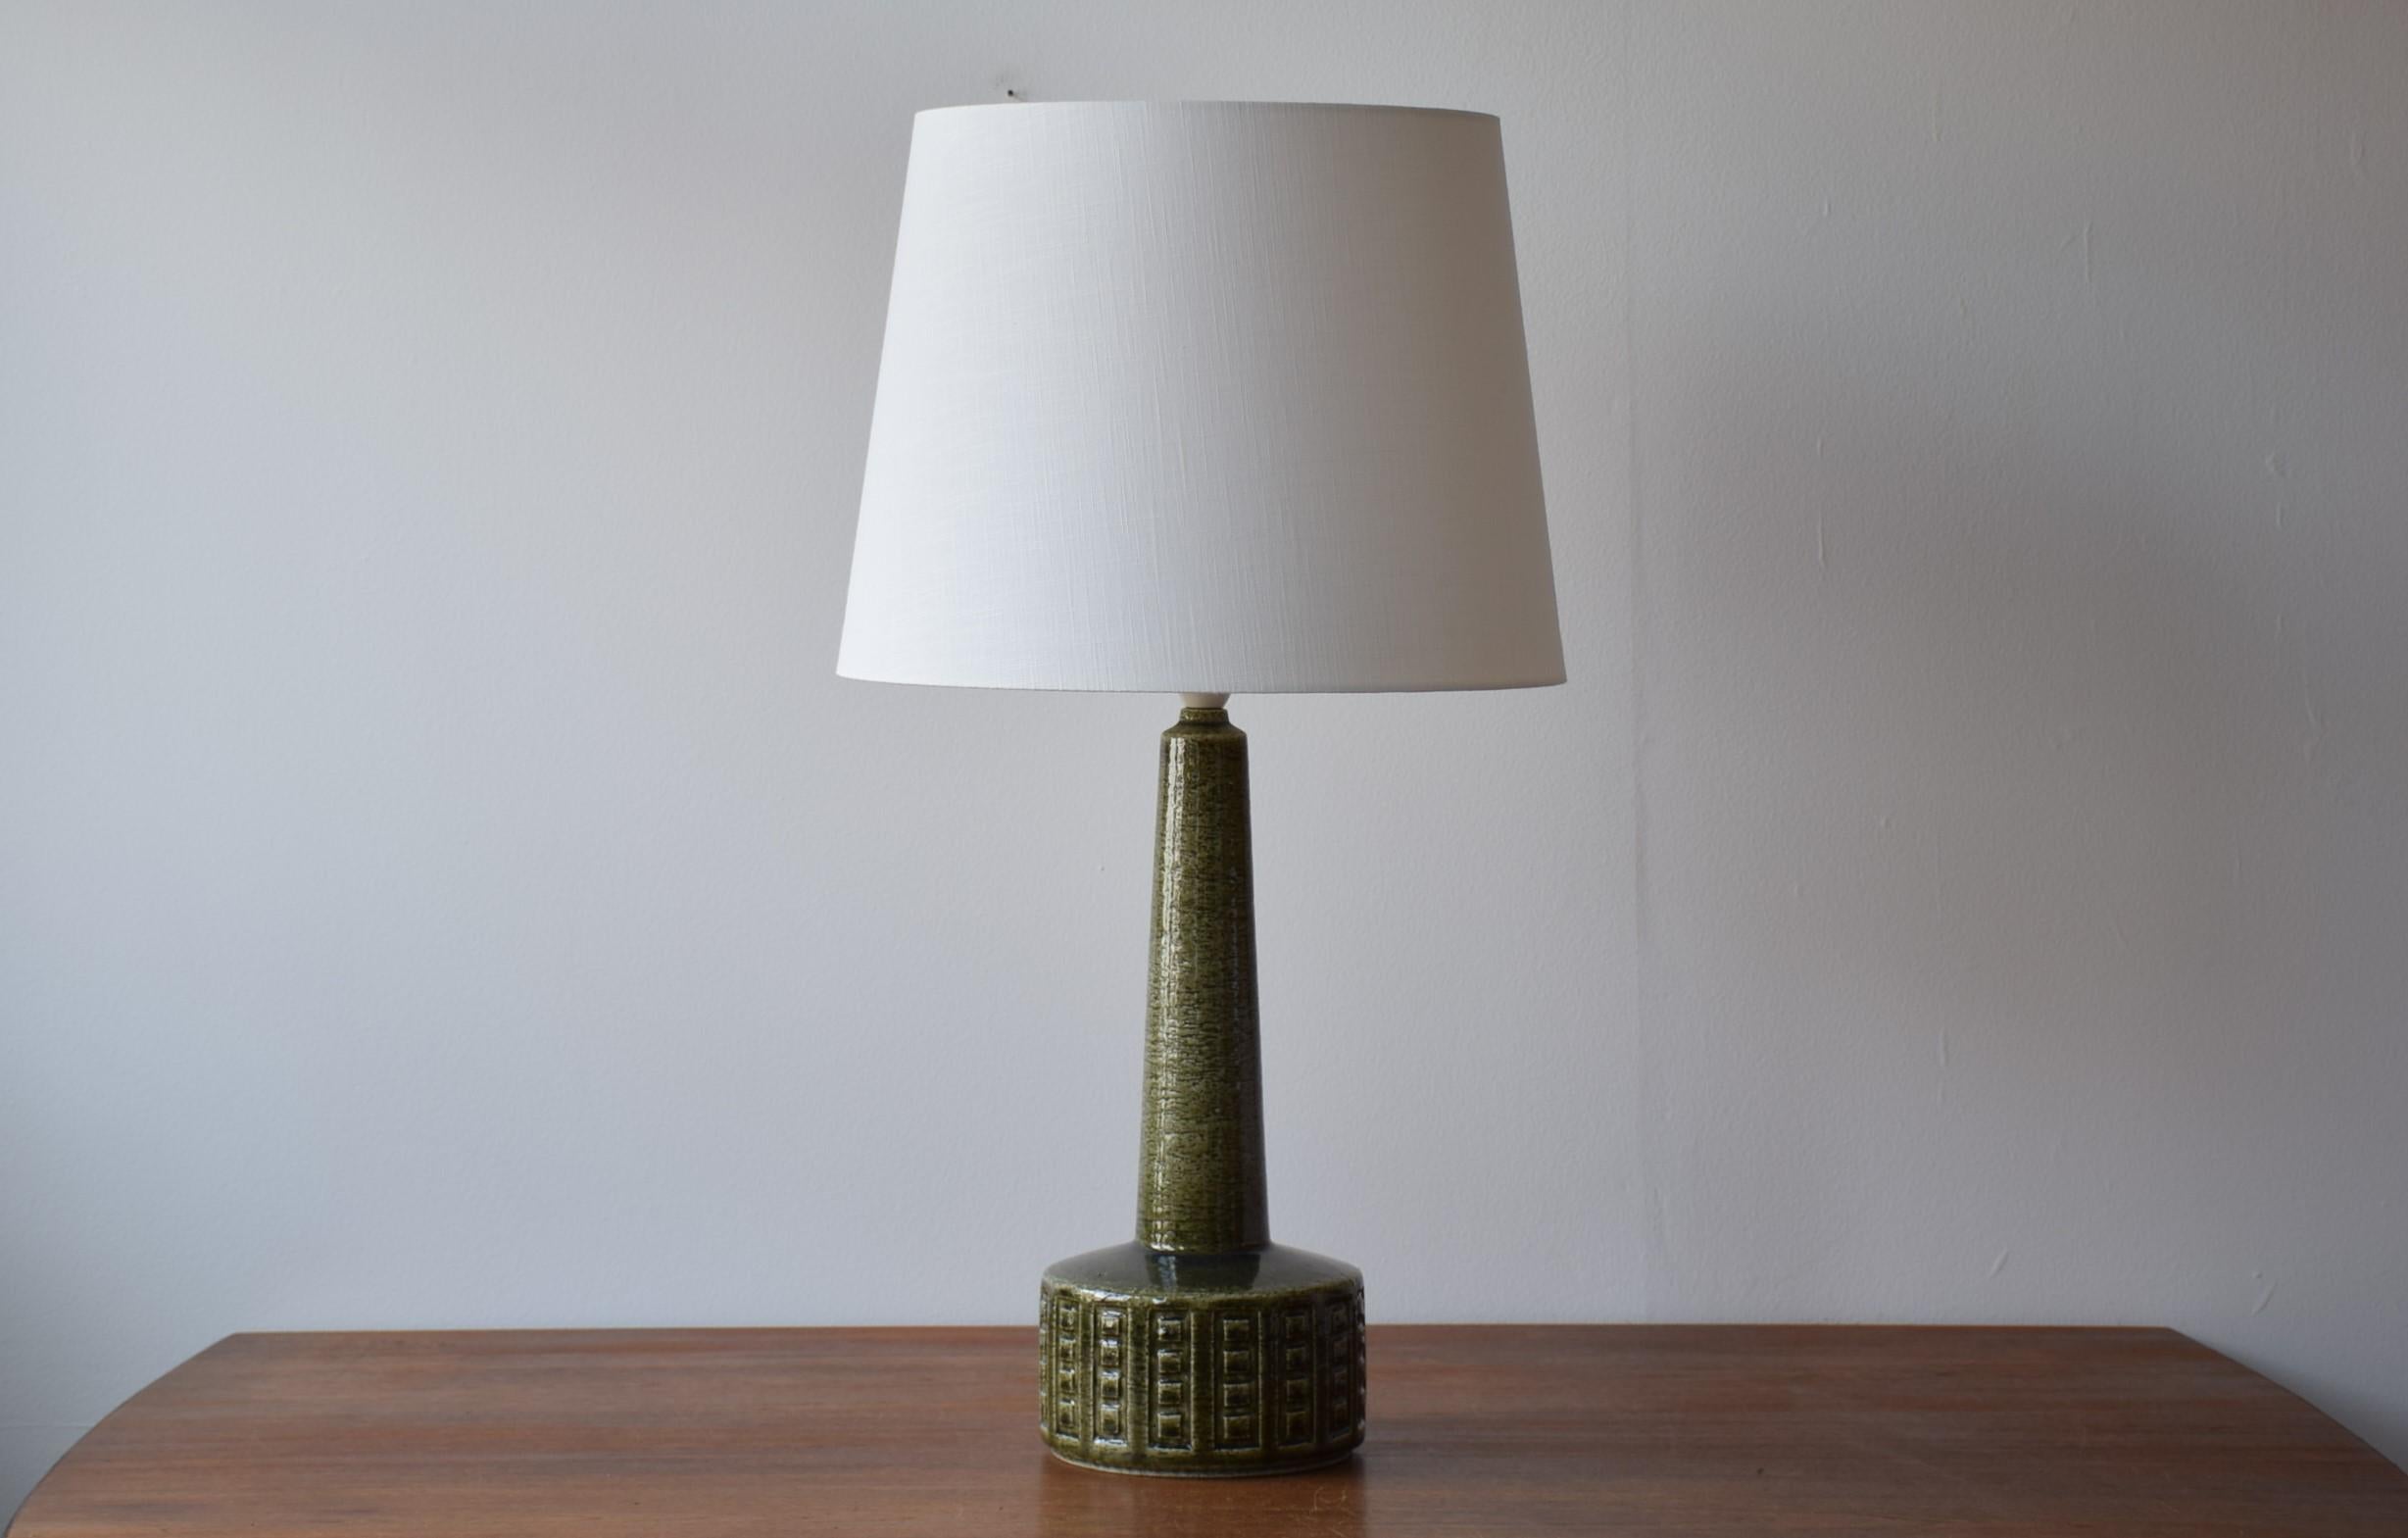 Midcentury tall table lamp from Danish Palshus.
The lamp was designed by Per Linnemann-Schmidt and produced, circa 1960s.
It is made with chamotte clay which gives a rough and vivid surface. The glaze is moss green with a little blue on